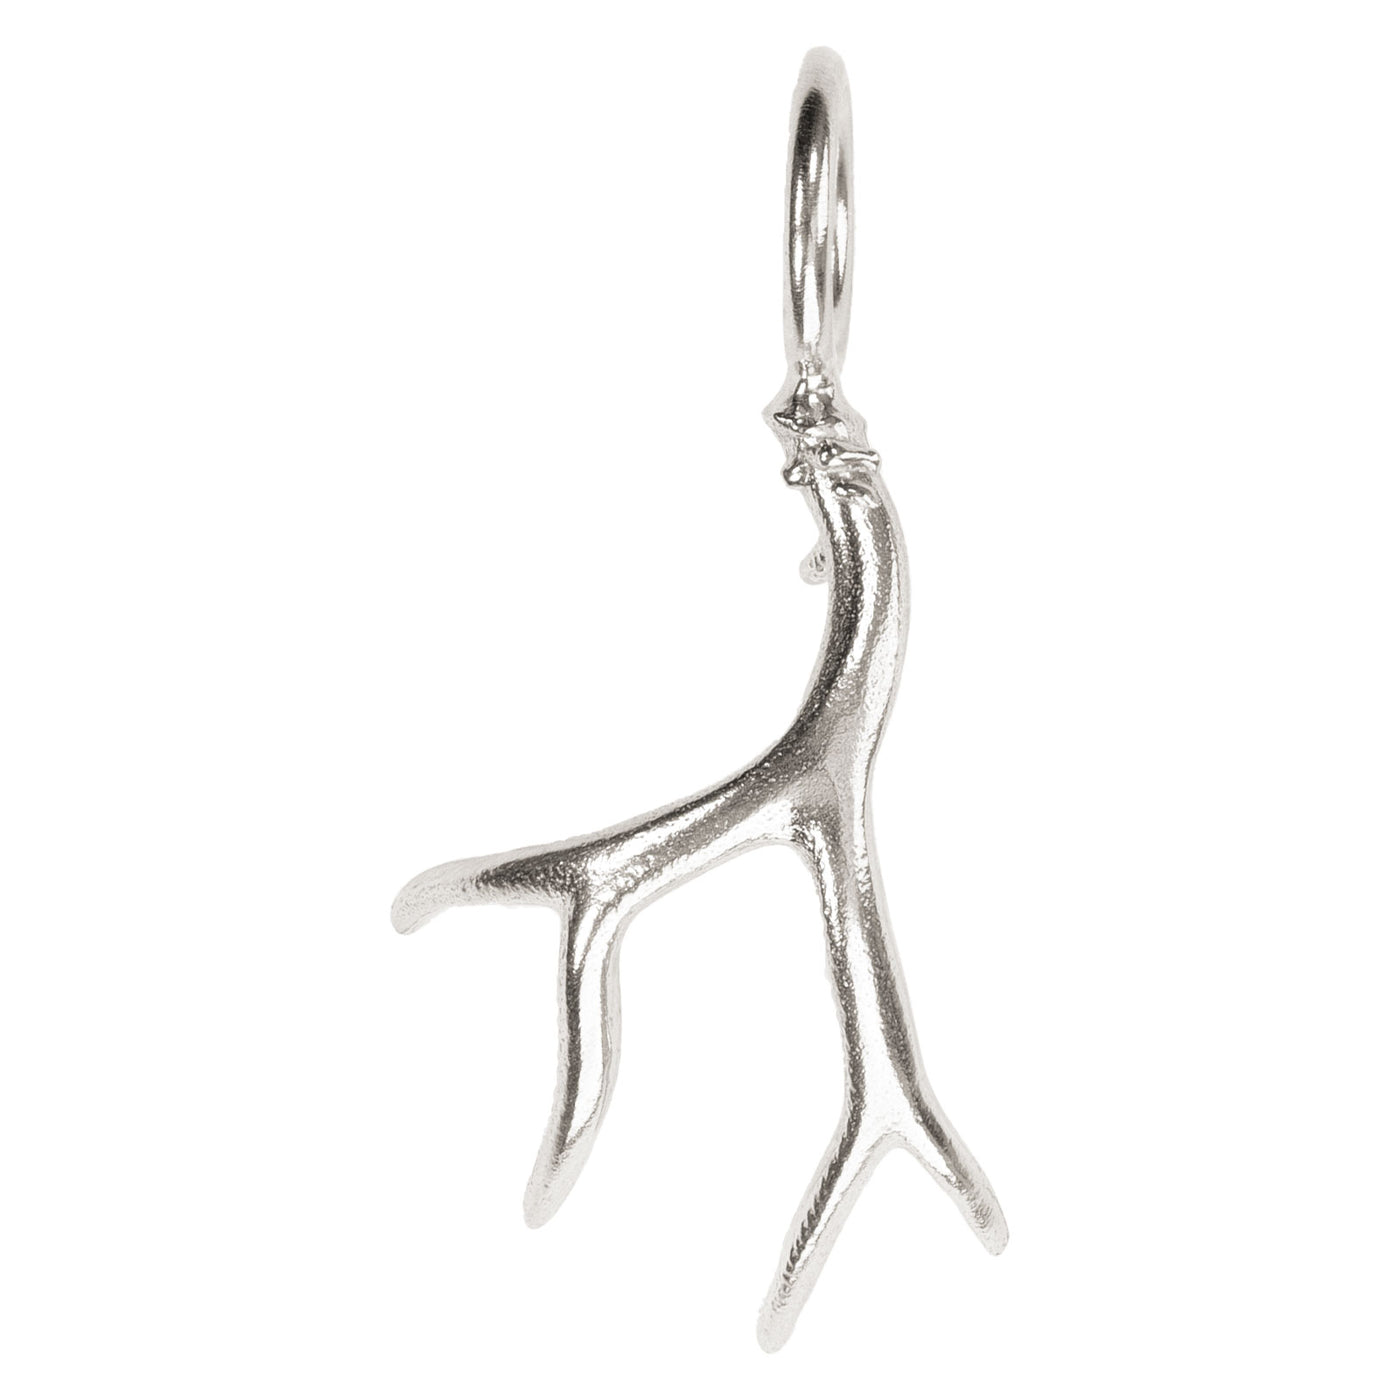 Small Silver Polished Antler Sculptural Charm